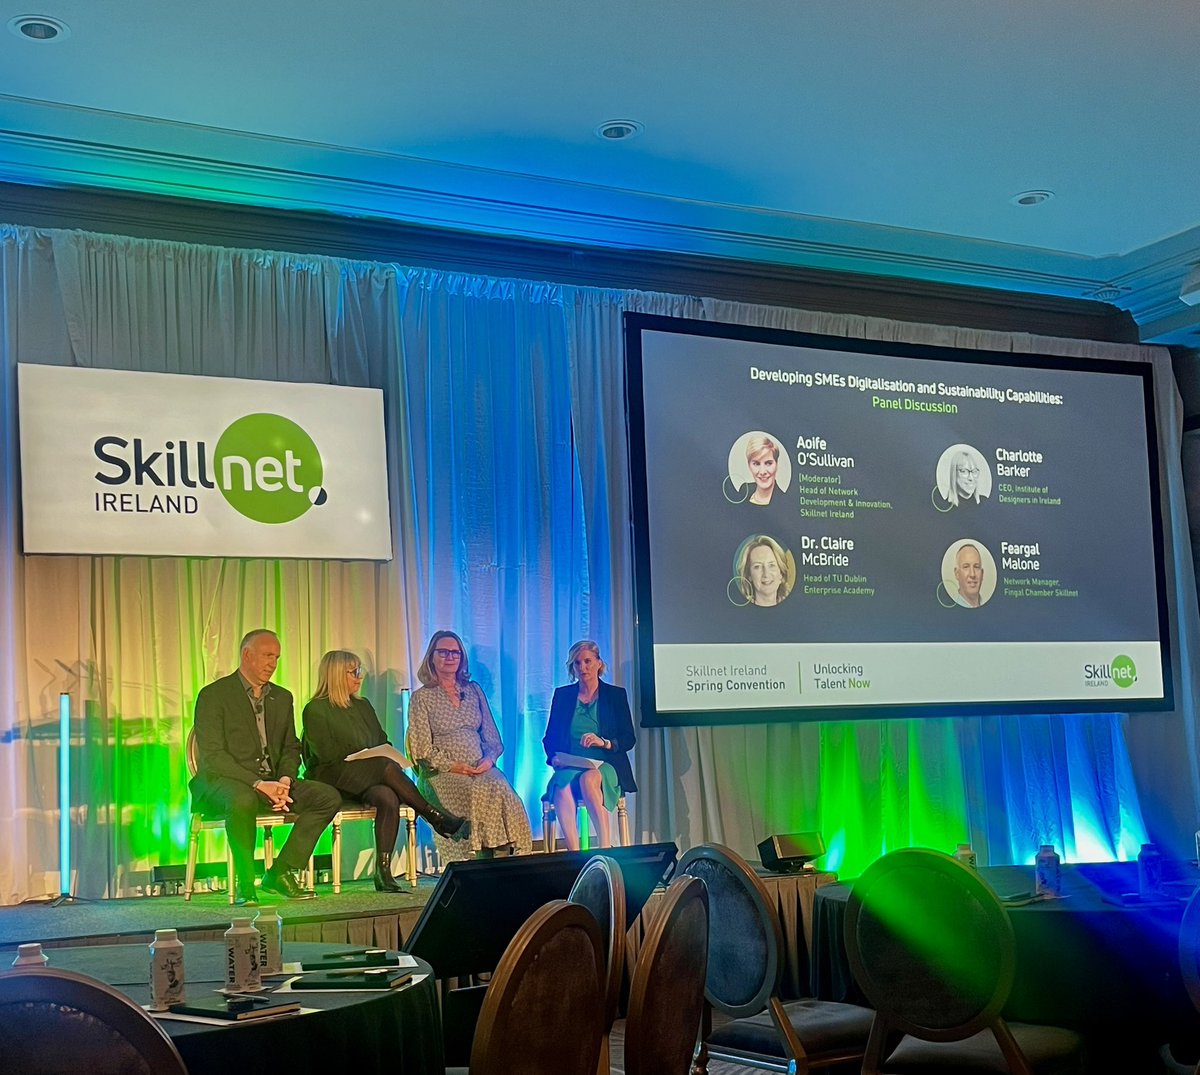 #DigitalTransformation and the critical link between industry and academia, including domain expertise was a key topic during the panel discussion, led by Aoife O’Sullivan, Head of Network Development and Innovation @SkillnetIreland with Claire McBride @WeAreTUDublin Enterprise